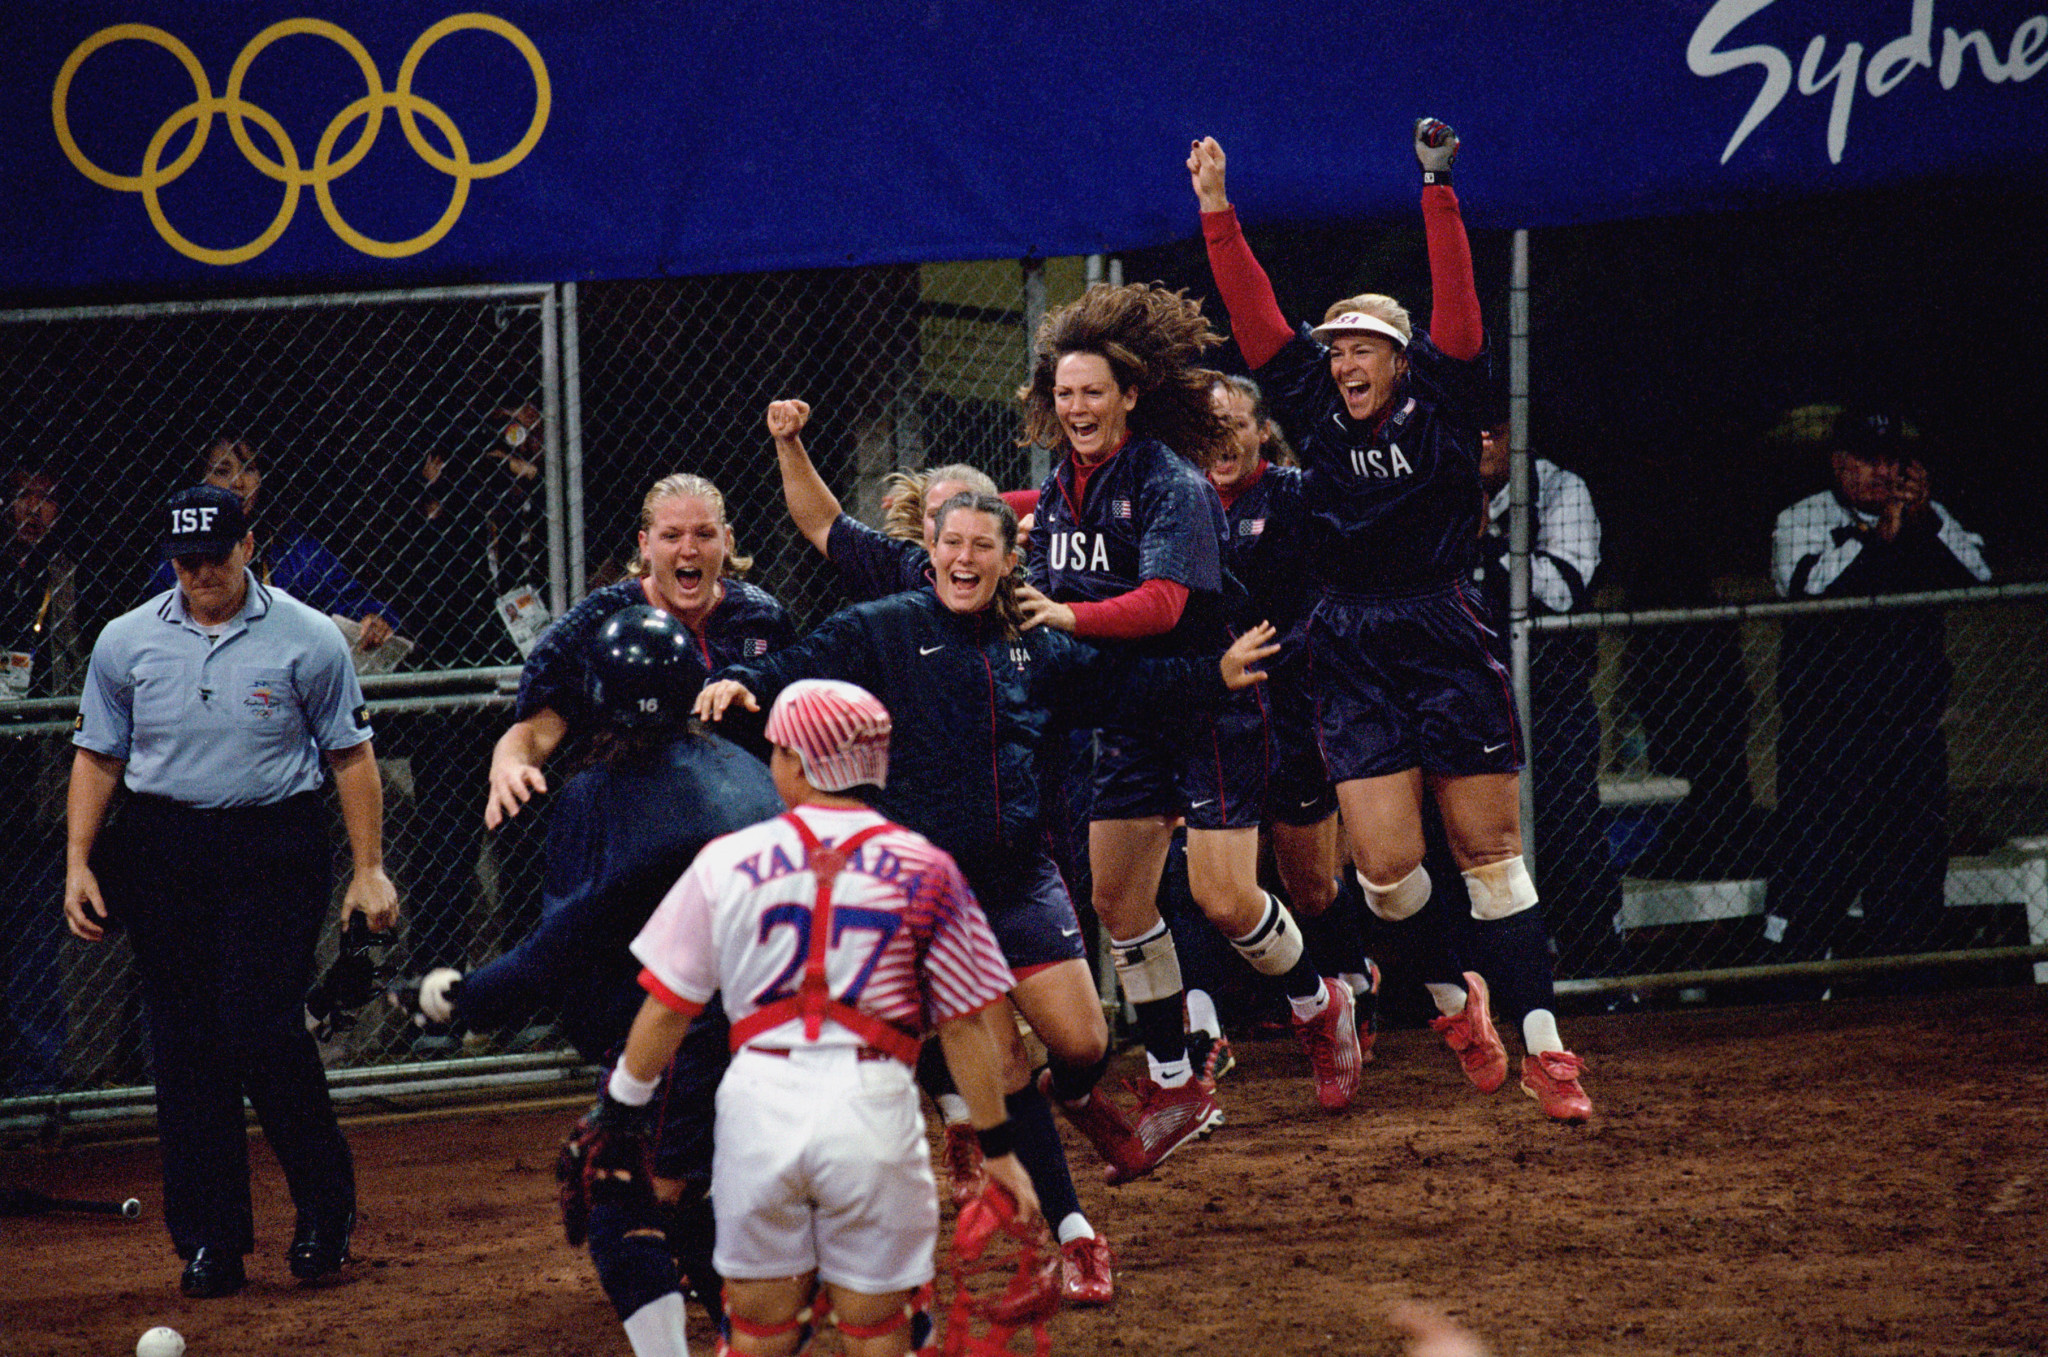 Umpire in Sydney 2000 Olympics women’s gold-medal game among inductees to Softball Canada Hall of Fame 